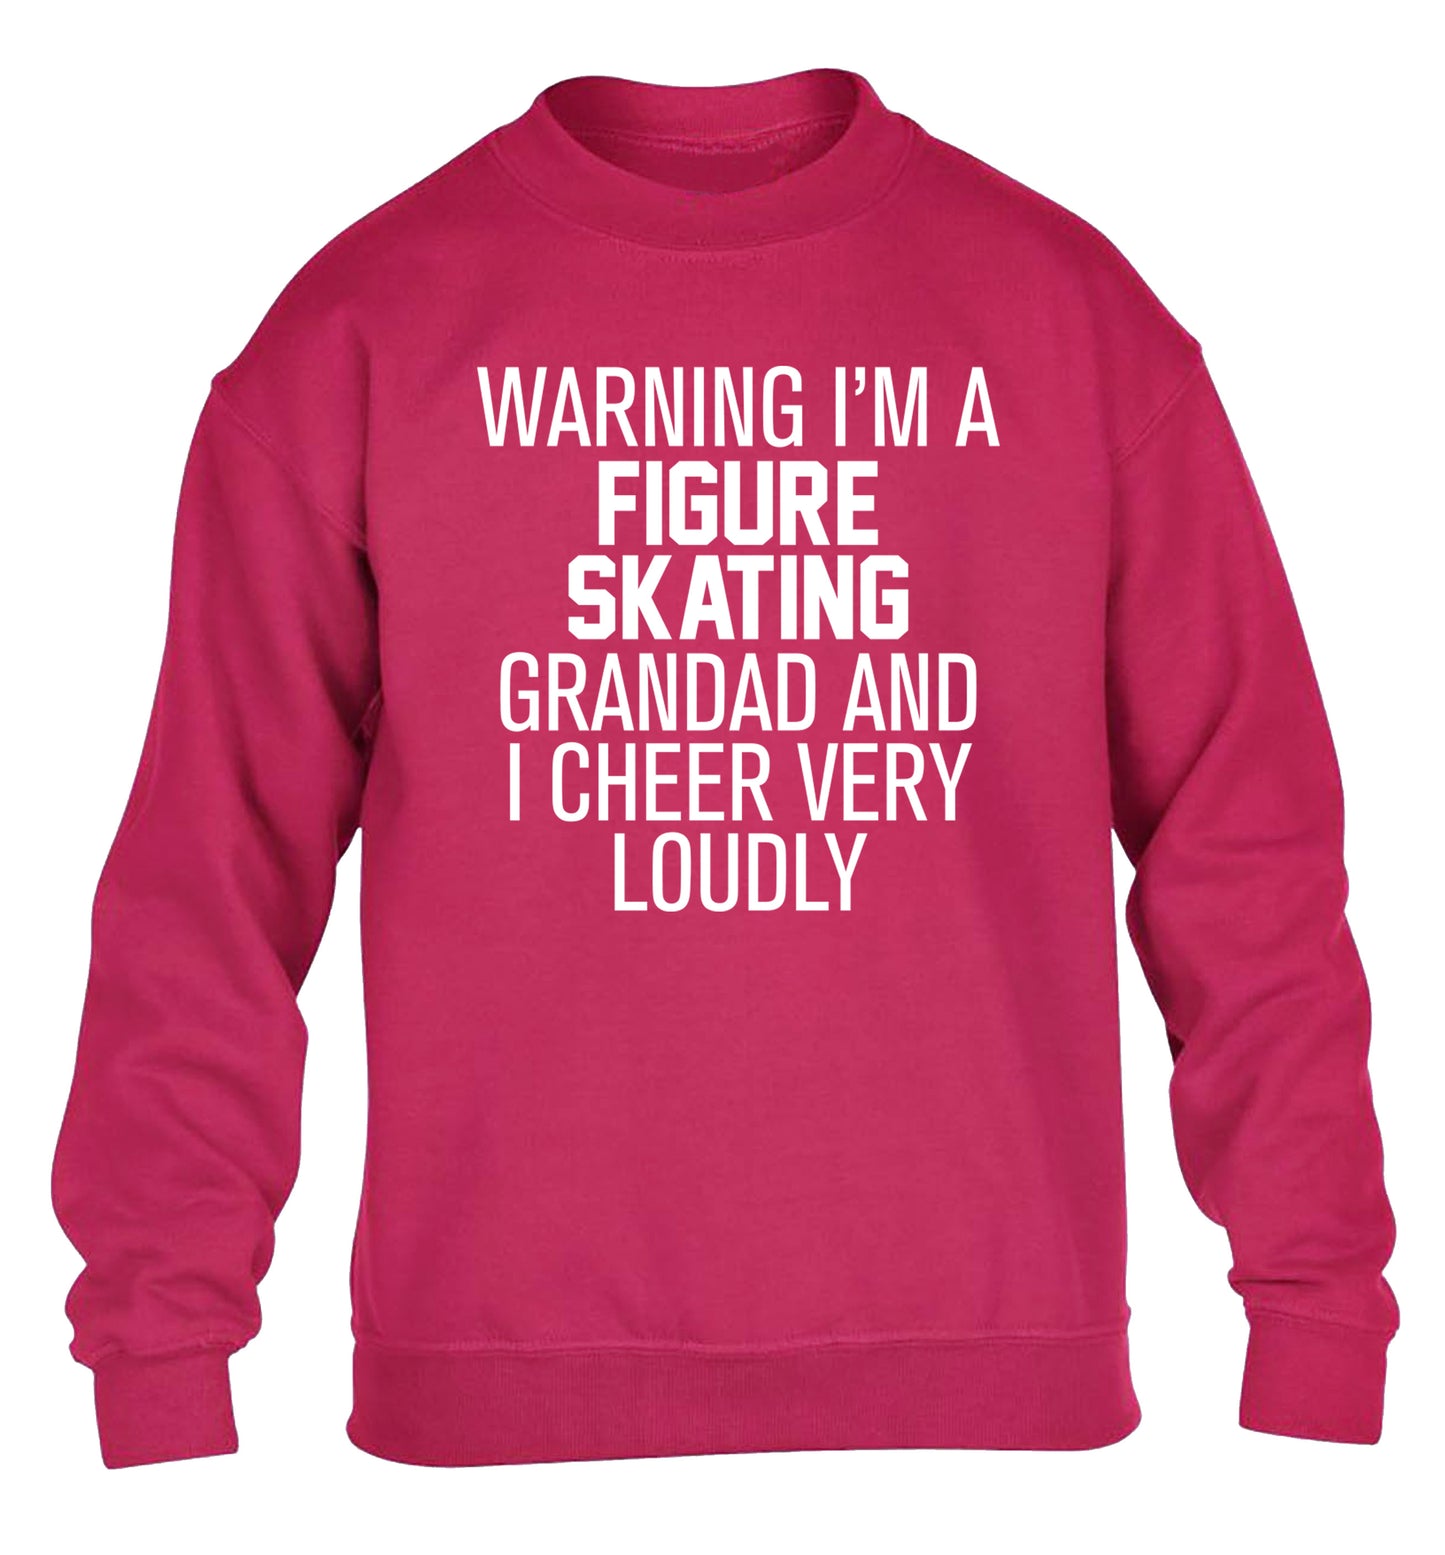 Warning I'm a figure skating grandad and I cheer very loudly children's pink sweater 12-14 Years